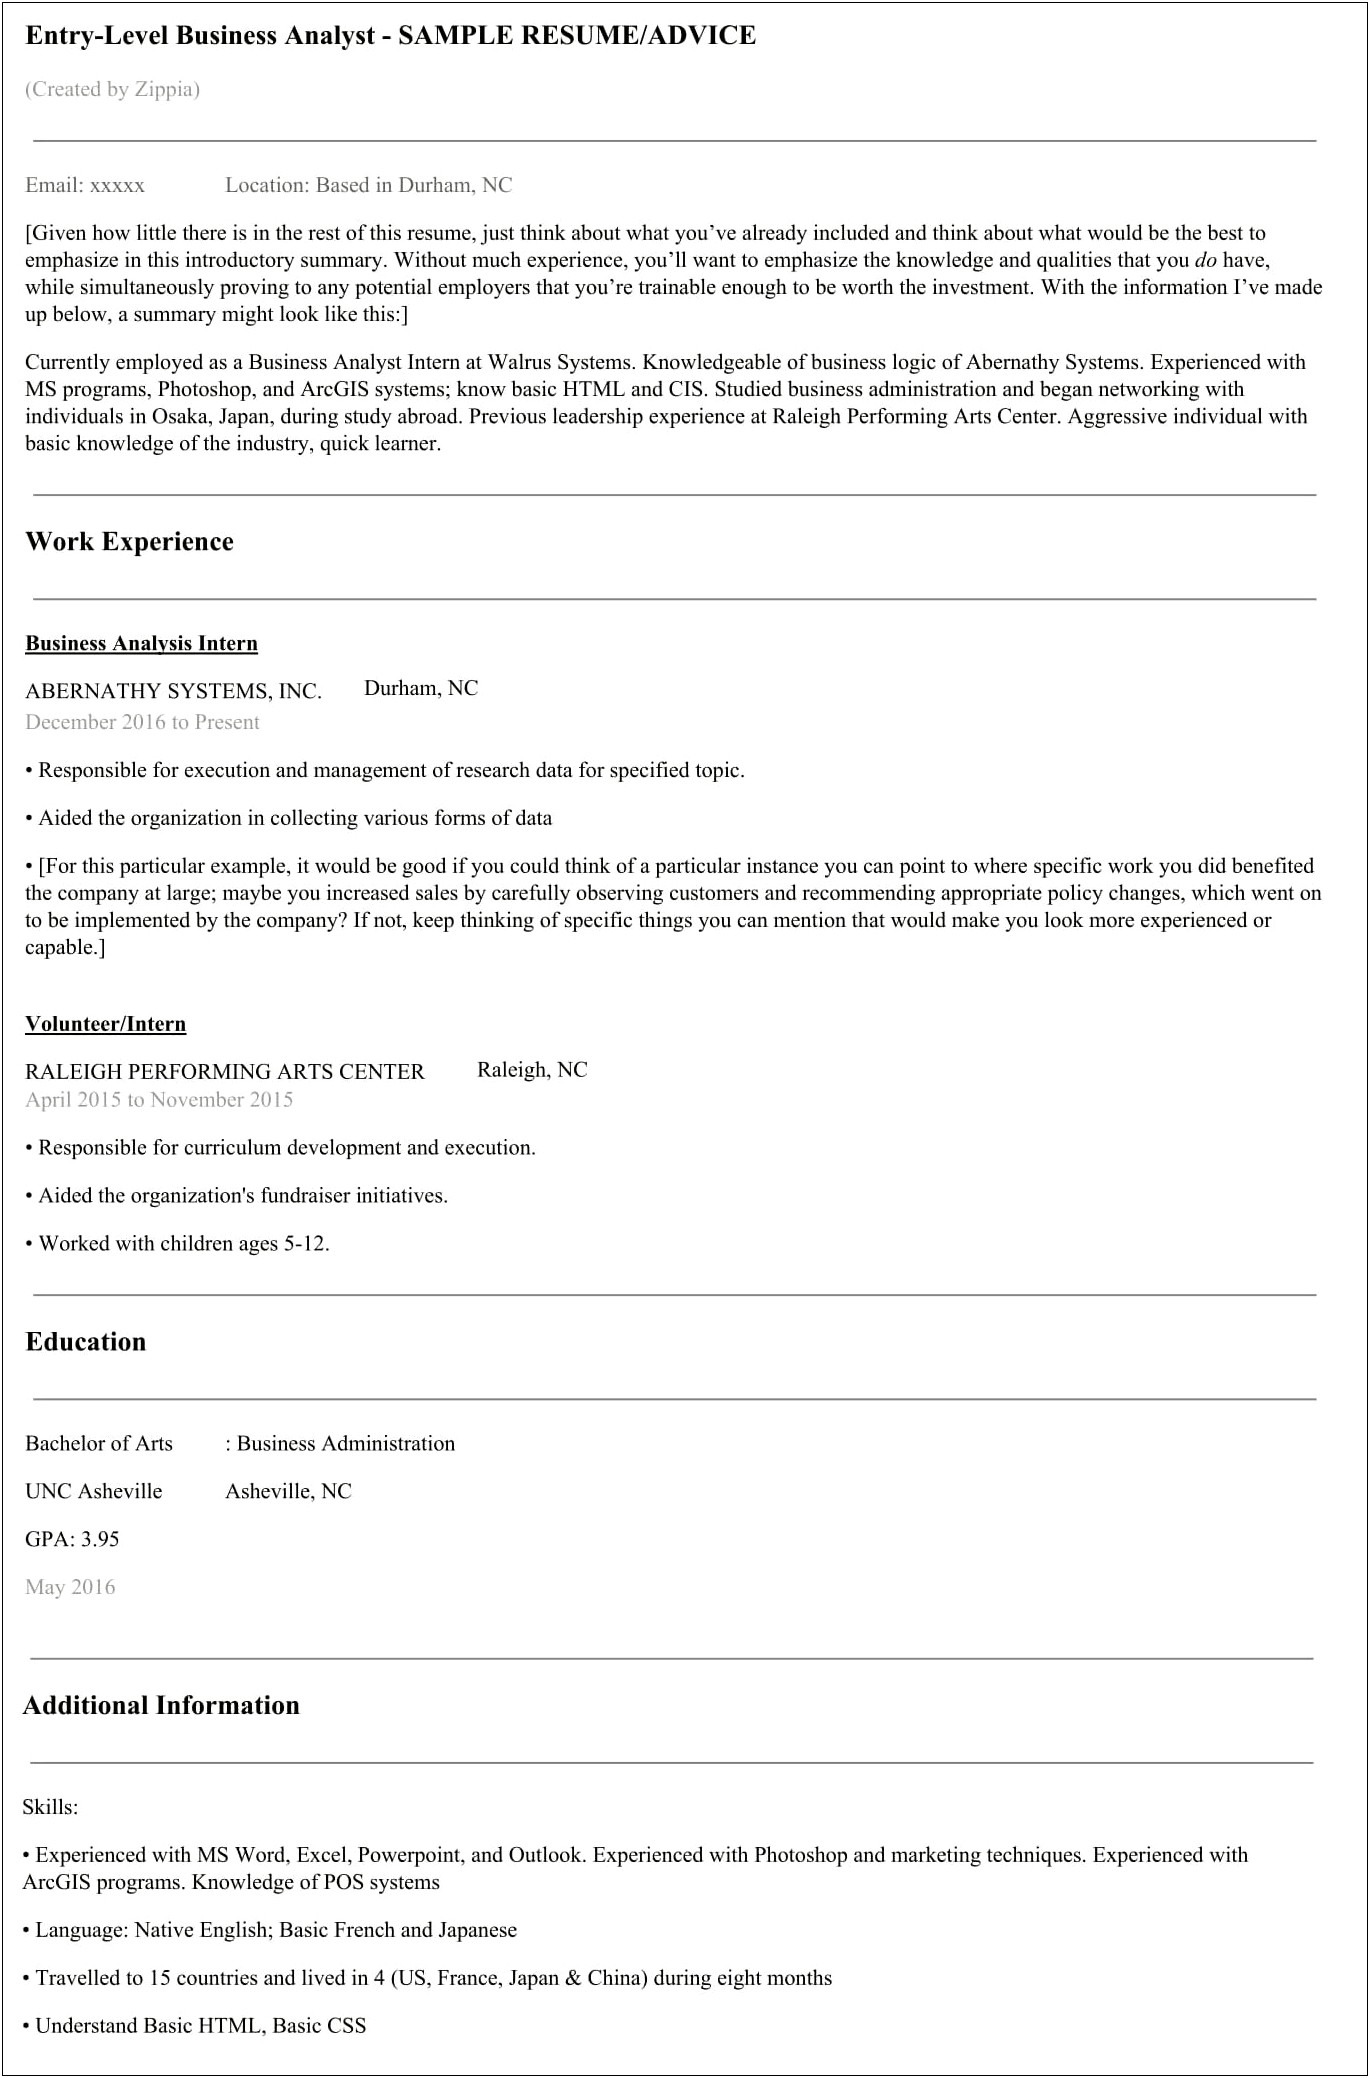 Resume Objective Business Analyst Sample